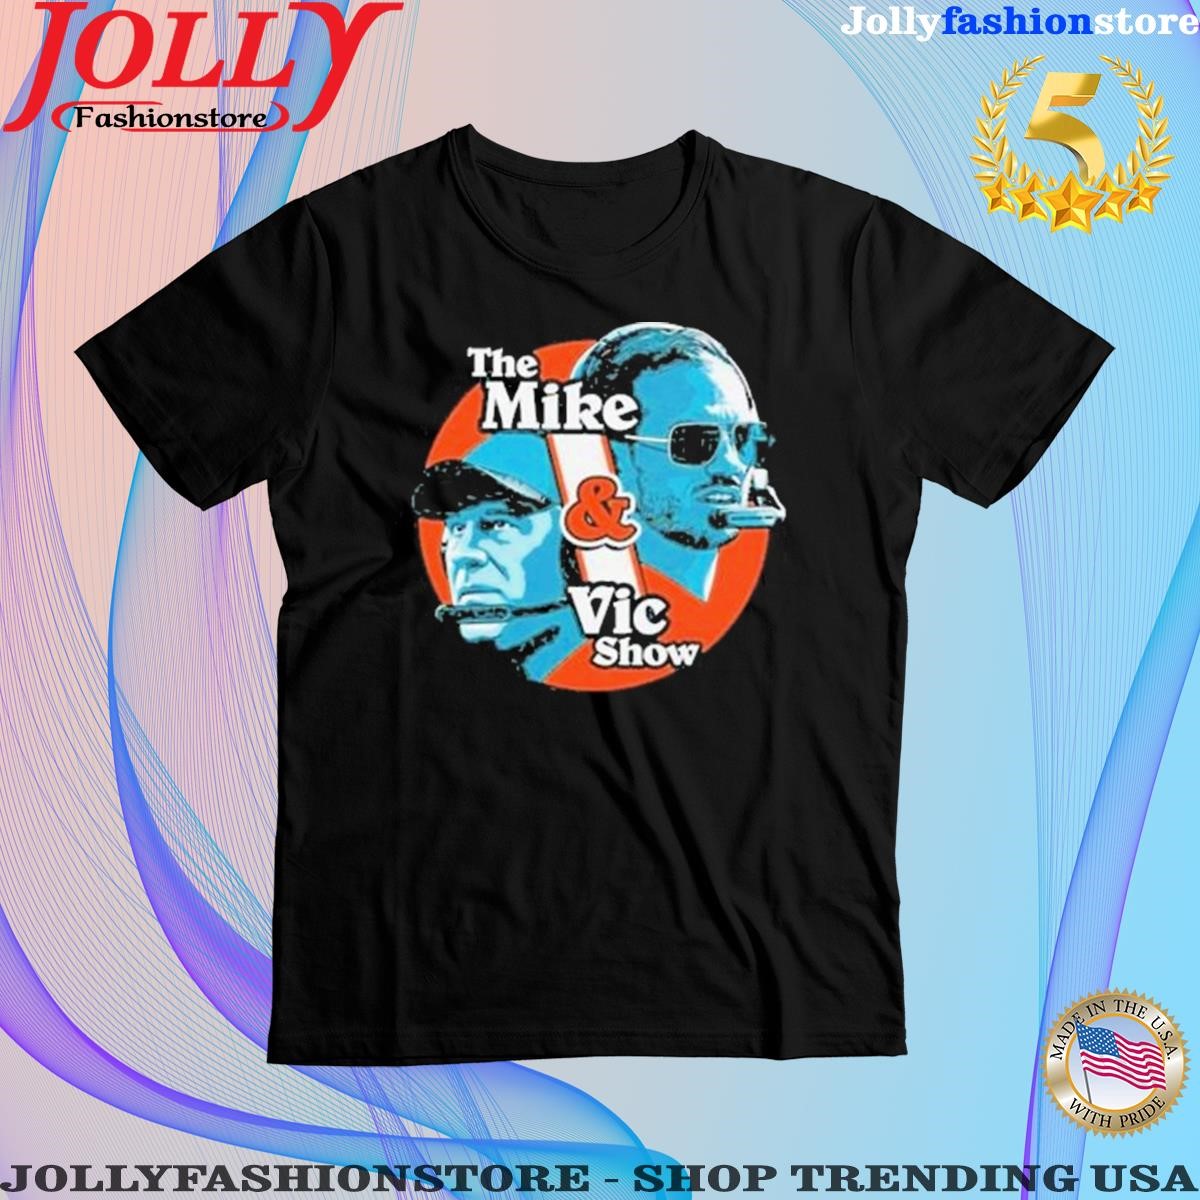 The mike and vic show T-shirt